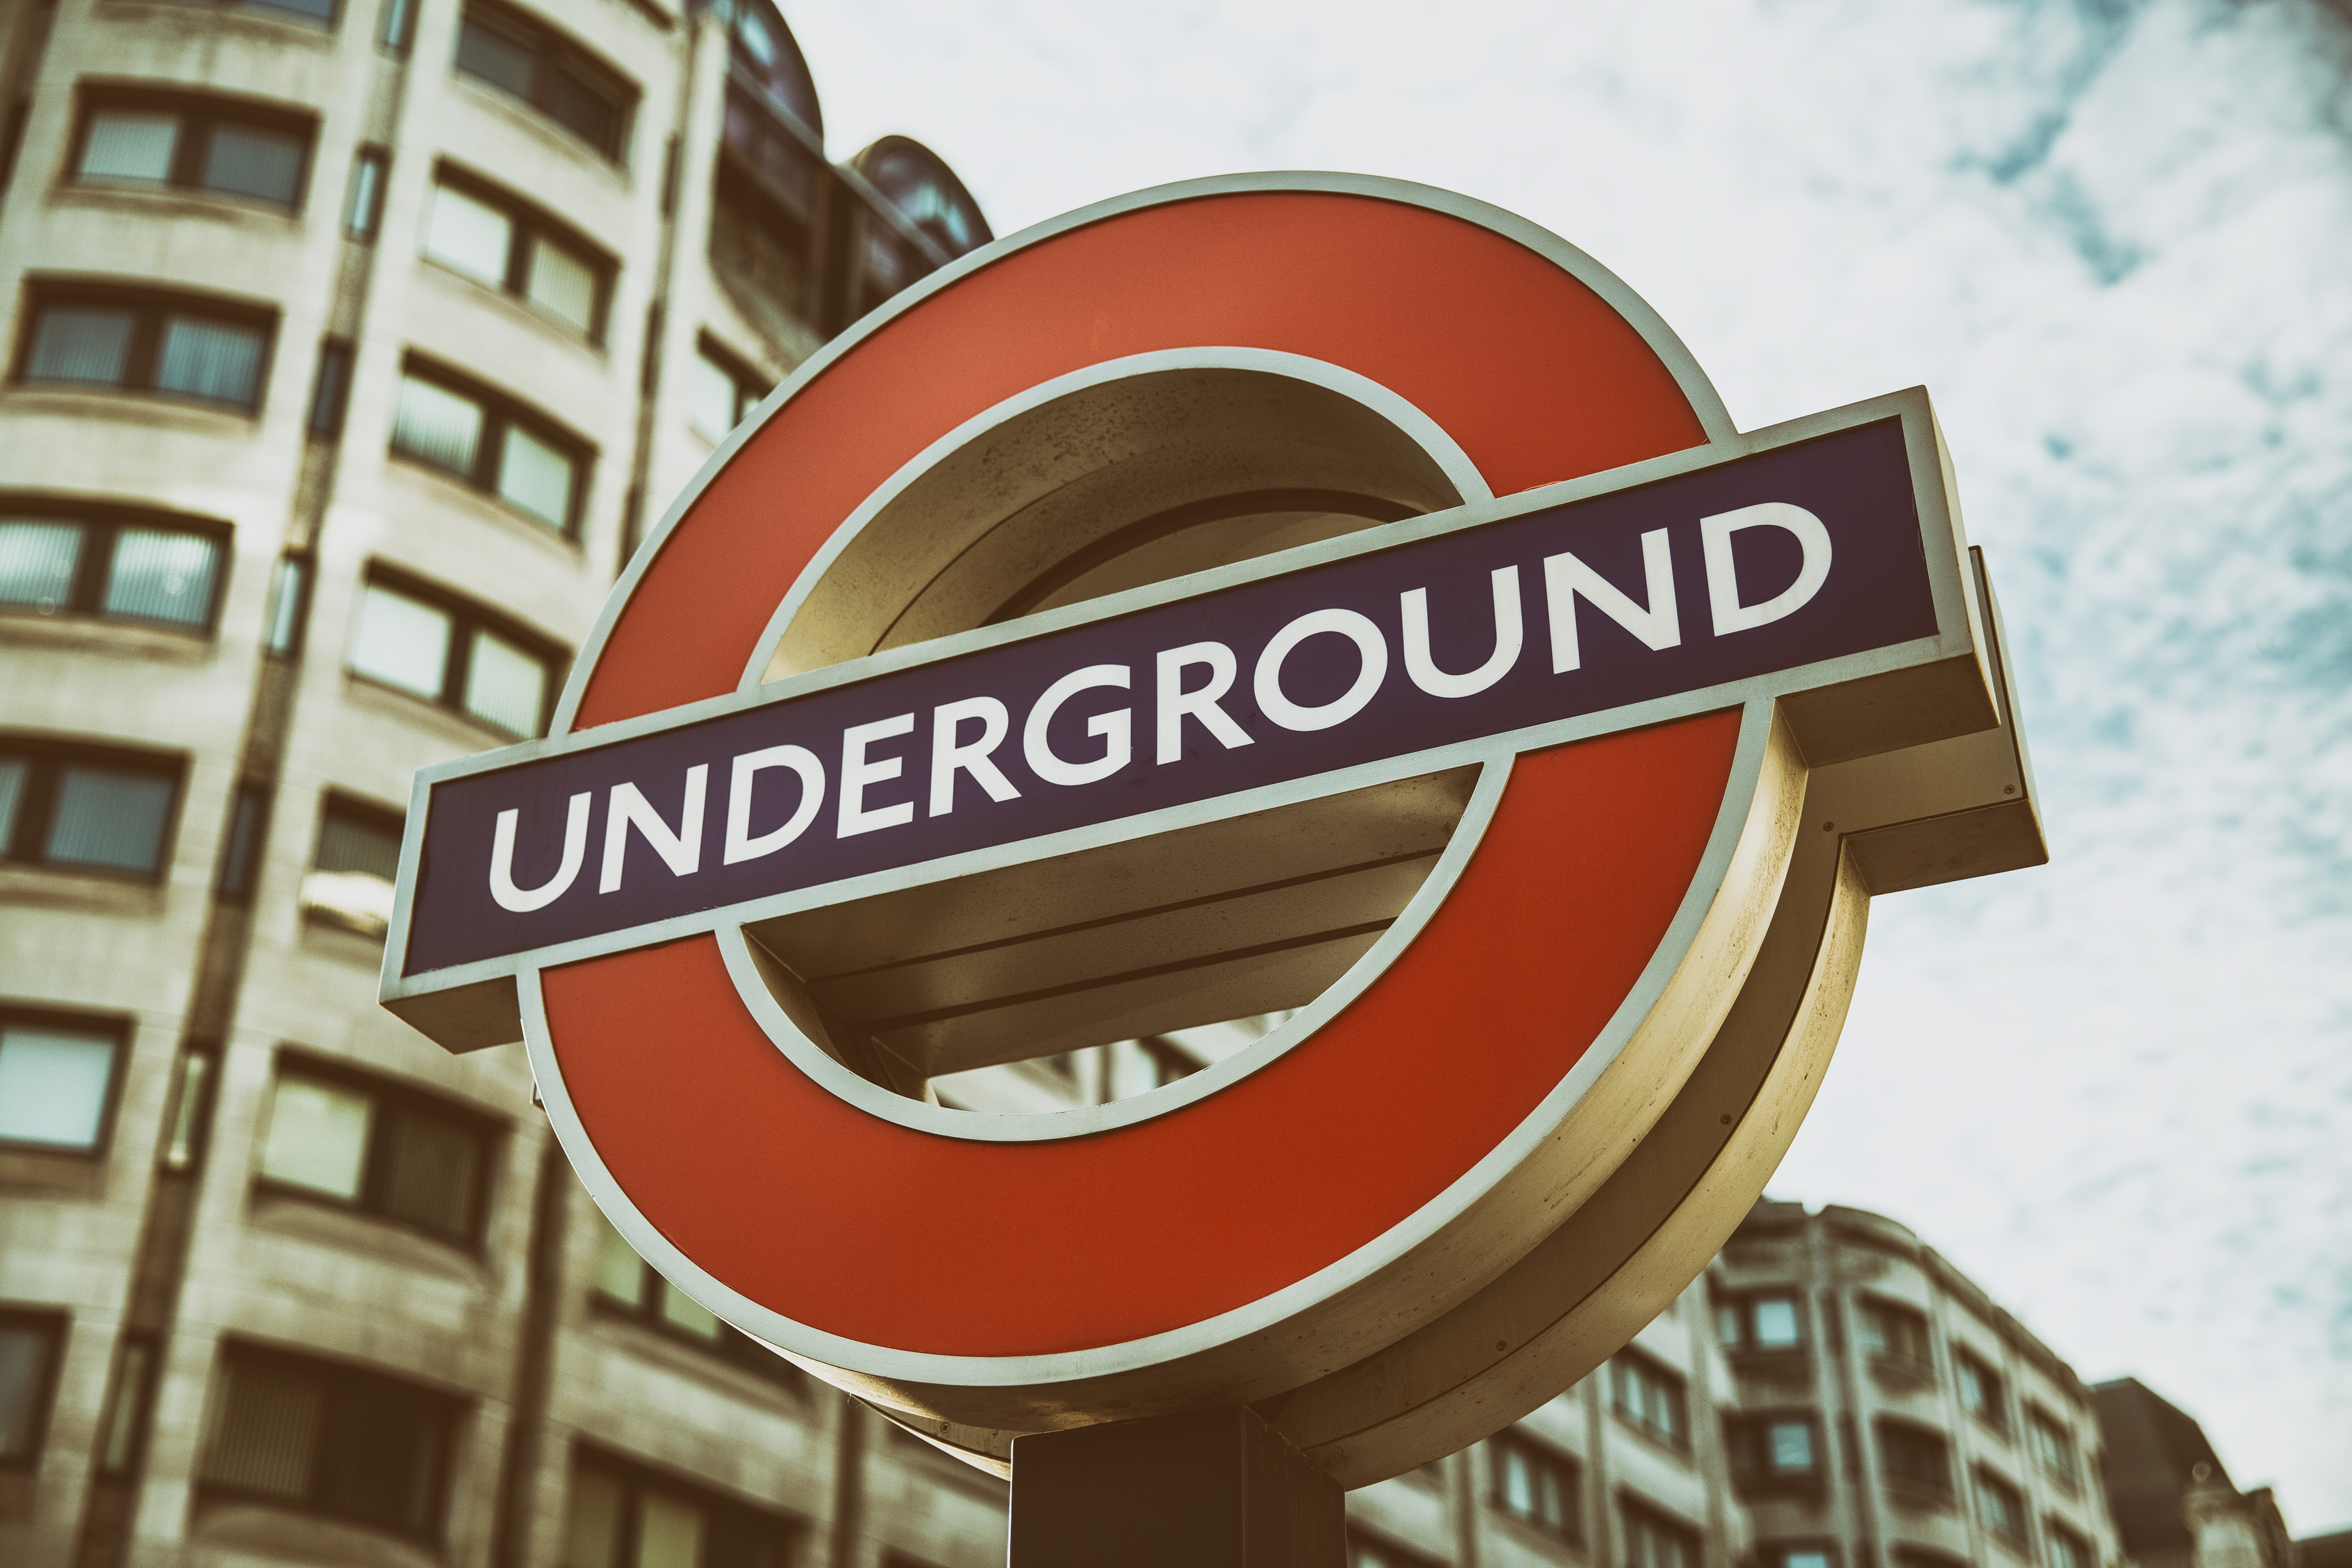 download-london-underground-sign-royalty-free-stock-photo-and-image